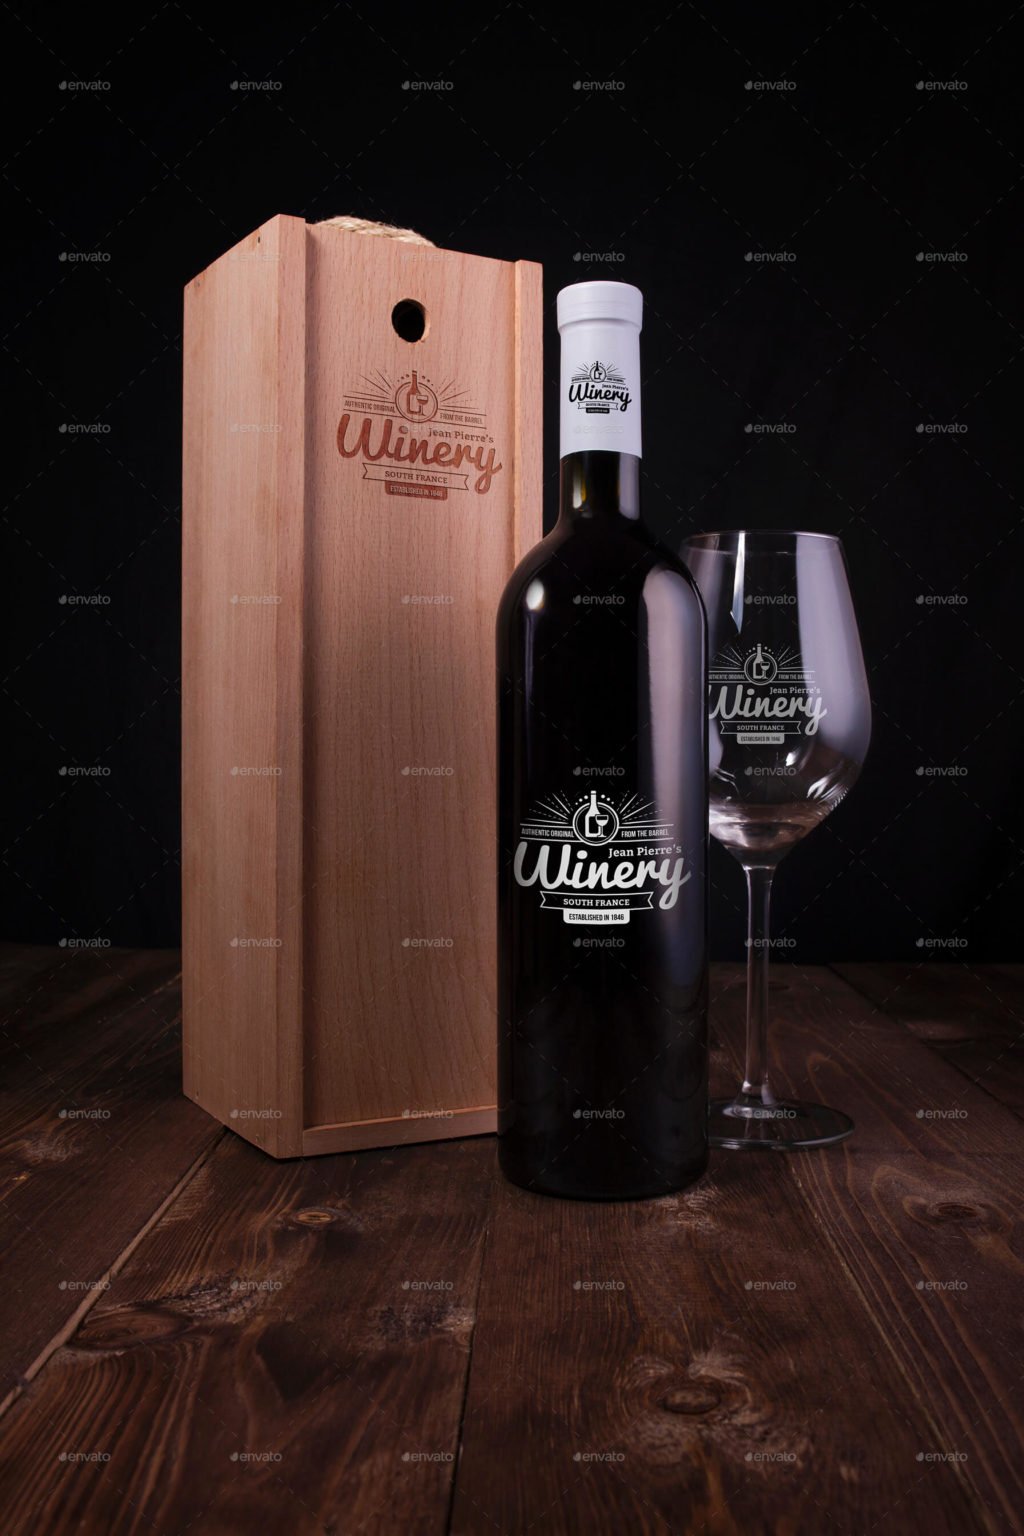 Download Wine Box Mockup | 33+ Attractive Wine Packaging PSD ...